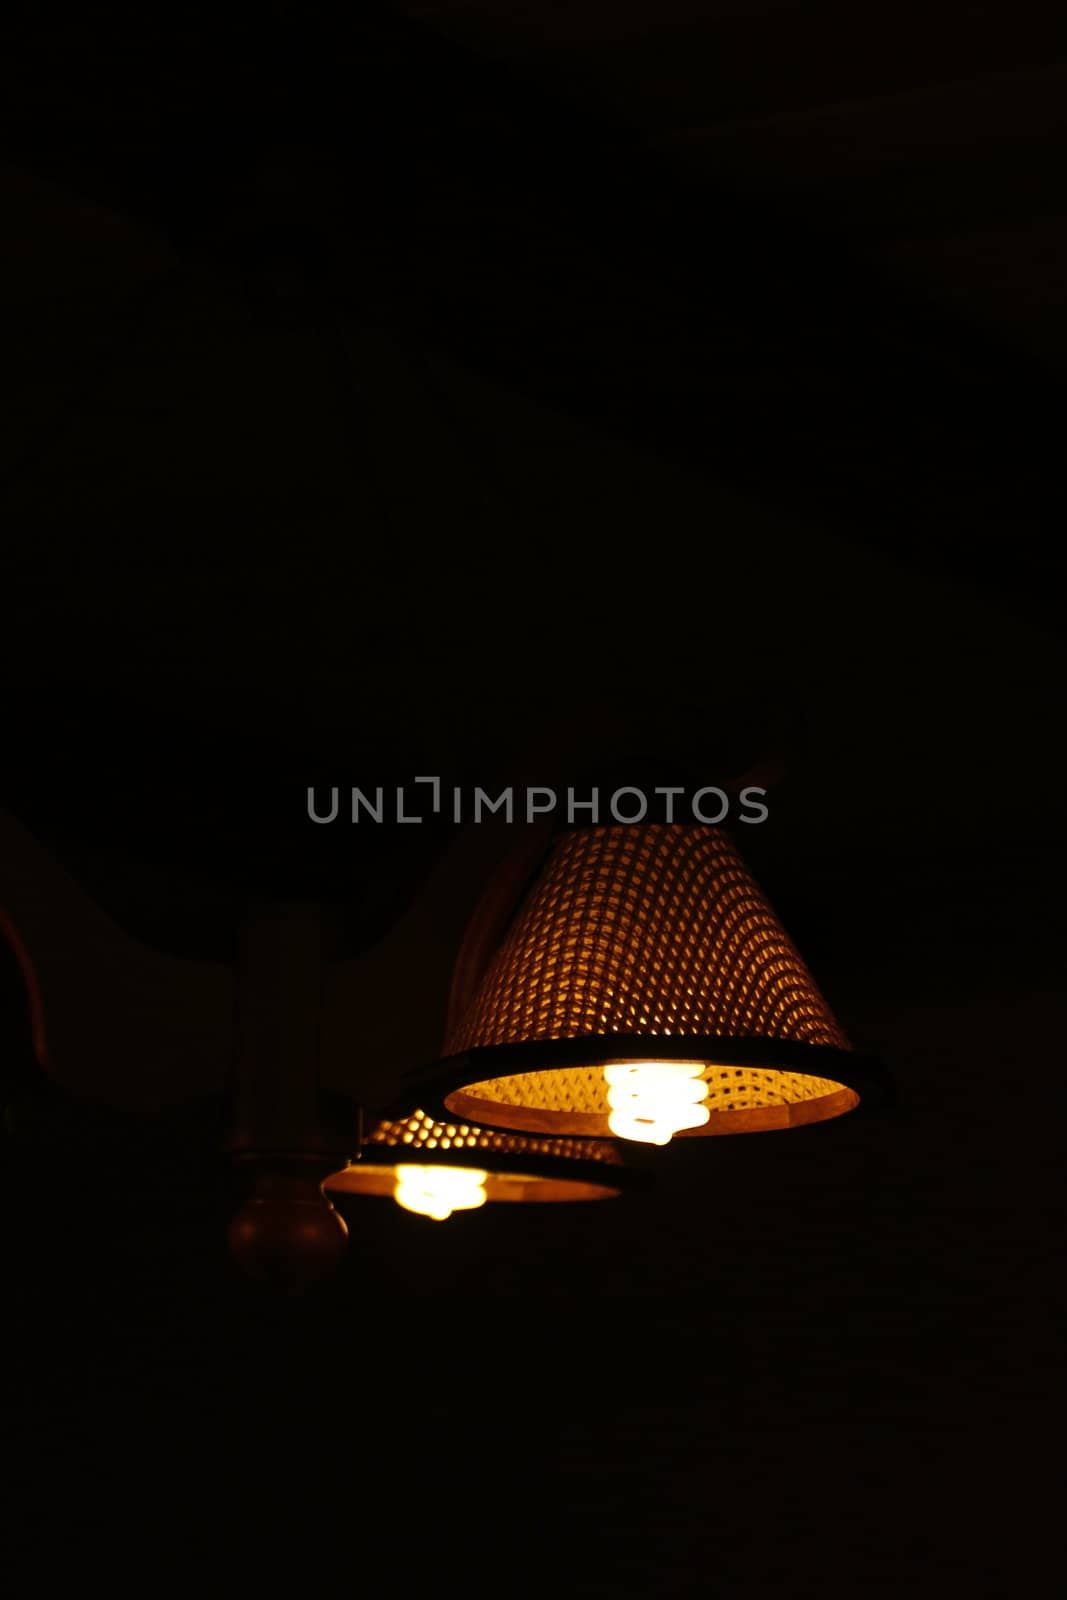 traditional lamp with economical modern lightbulb